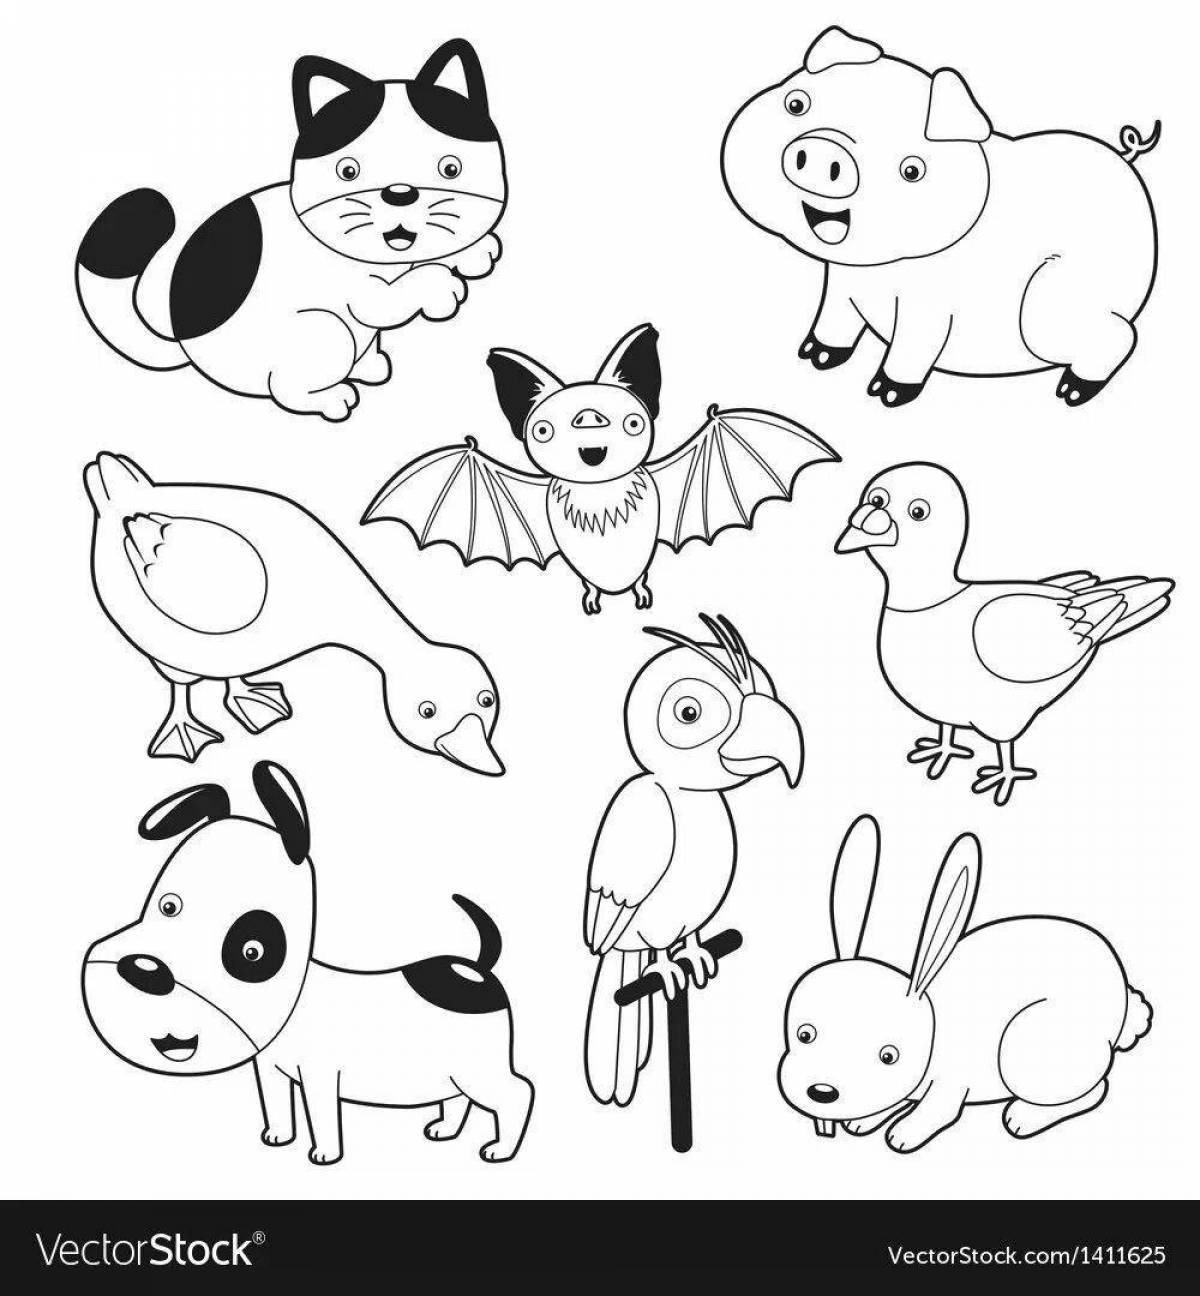 Snuggly coloring page pets